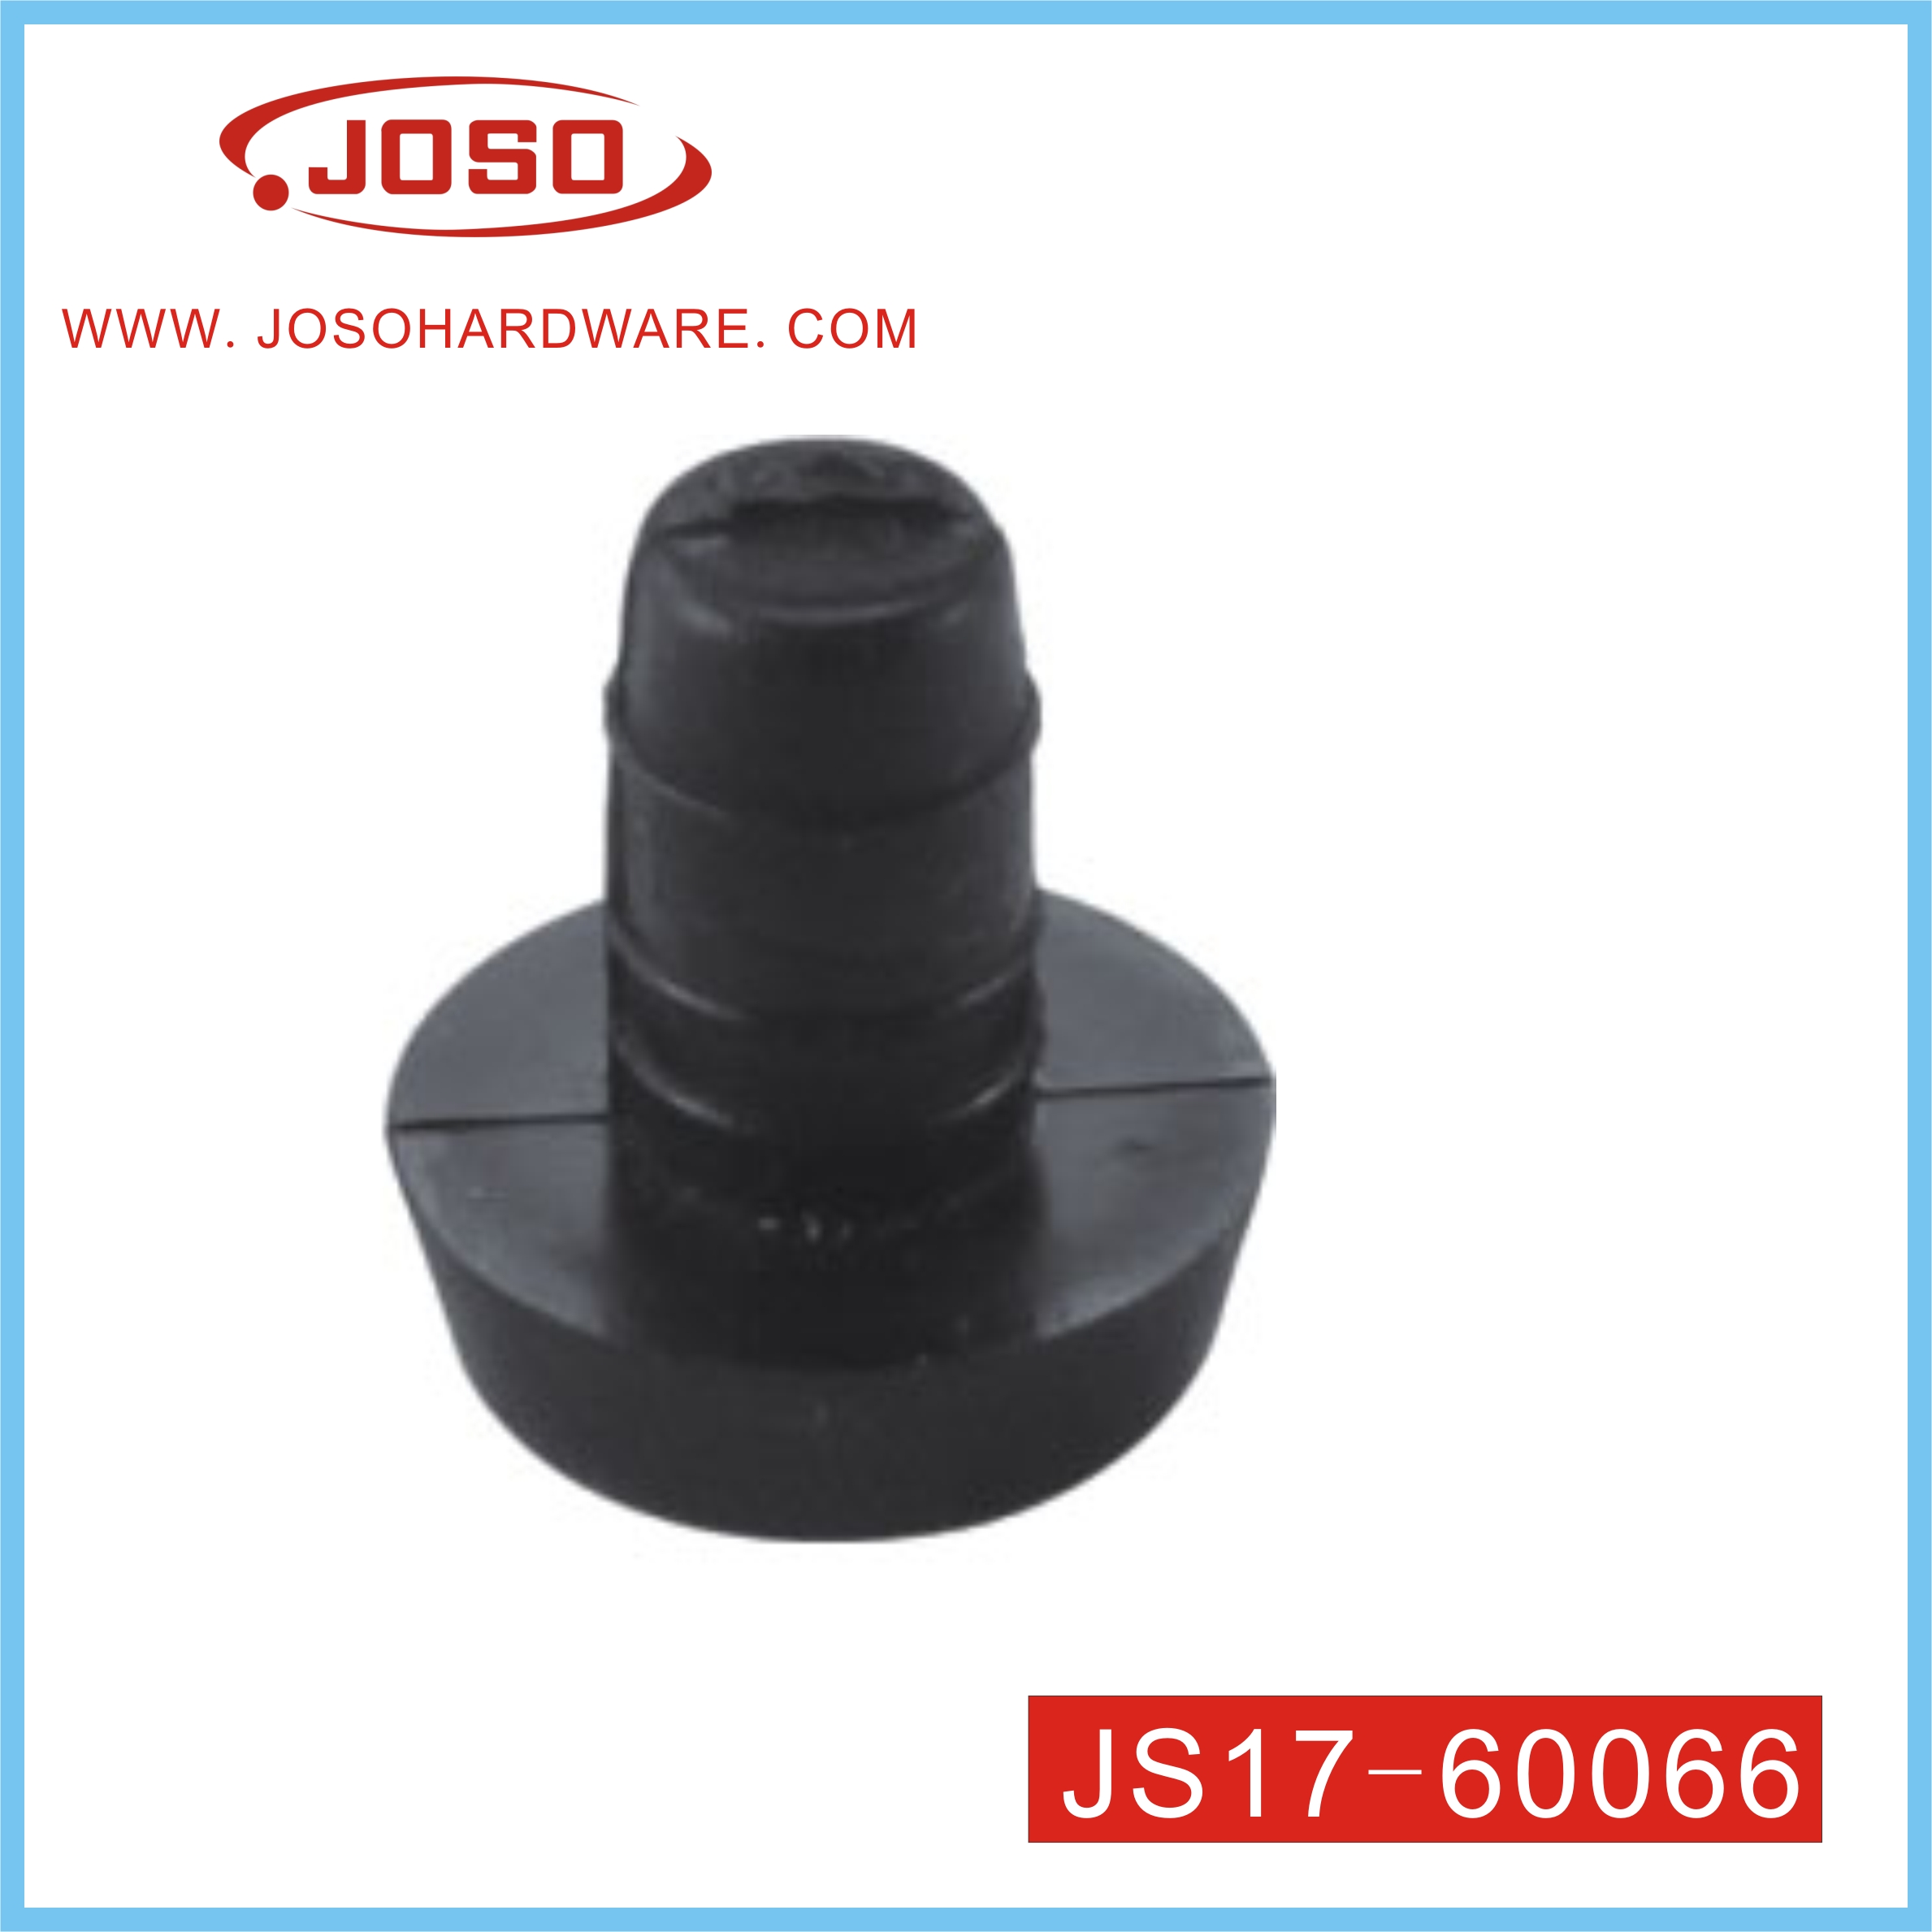 Hot Selling PVC Stopper of Furniture Hardware for Protector